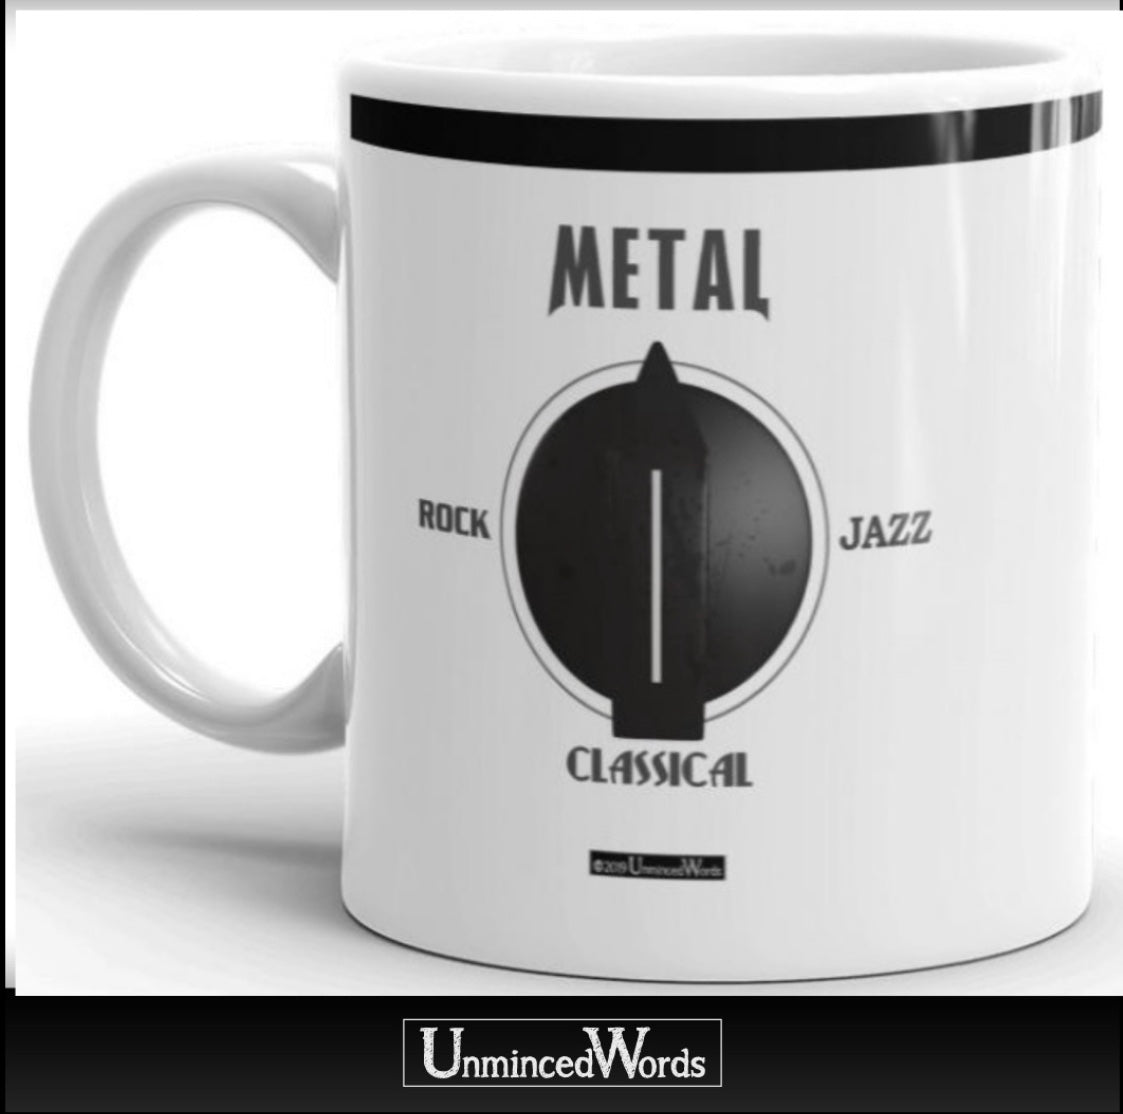 Great gift for metal-heads